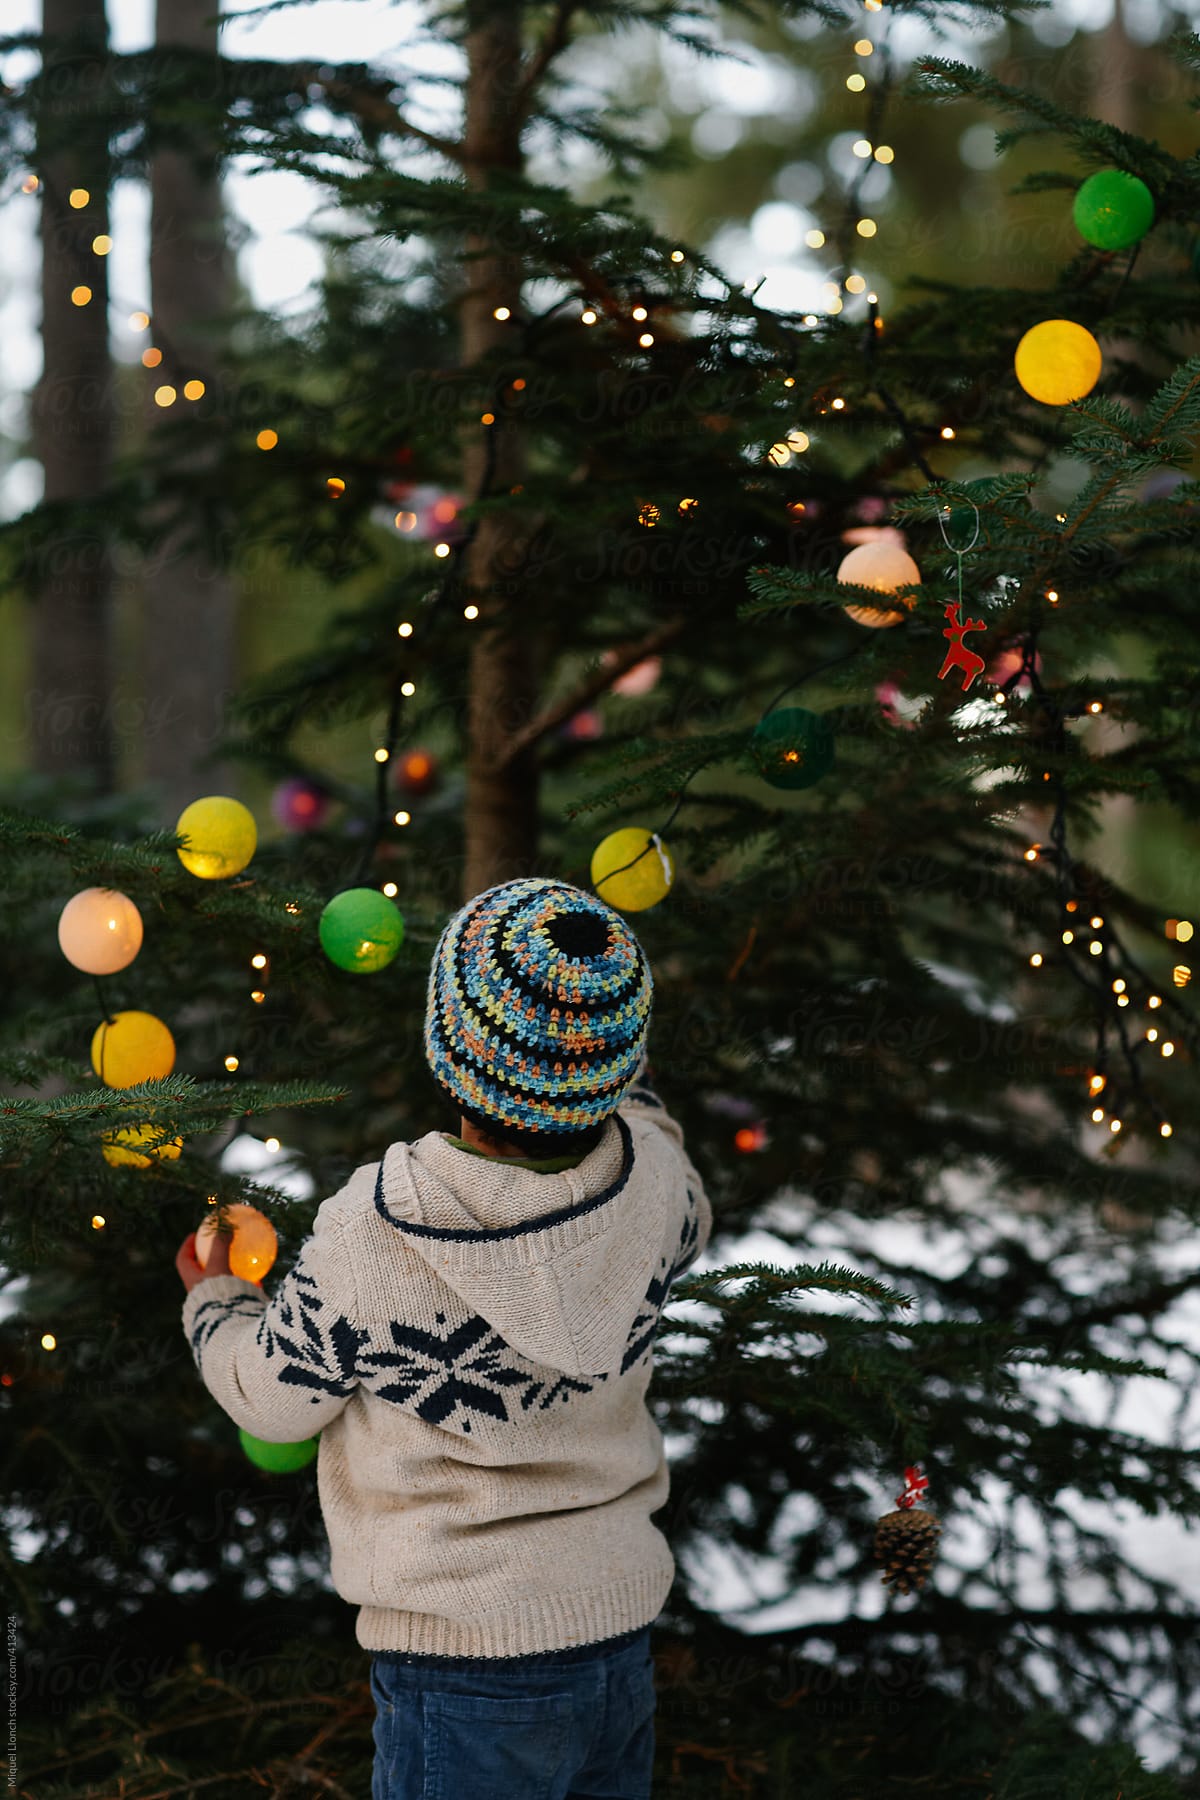 Child decorating a Christmas tree at the home yard 